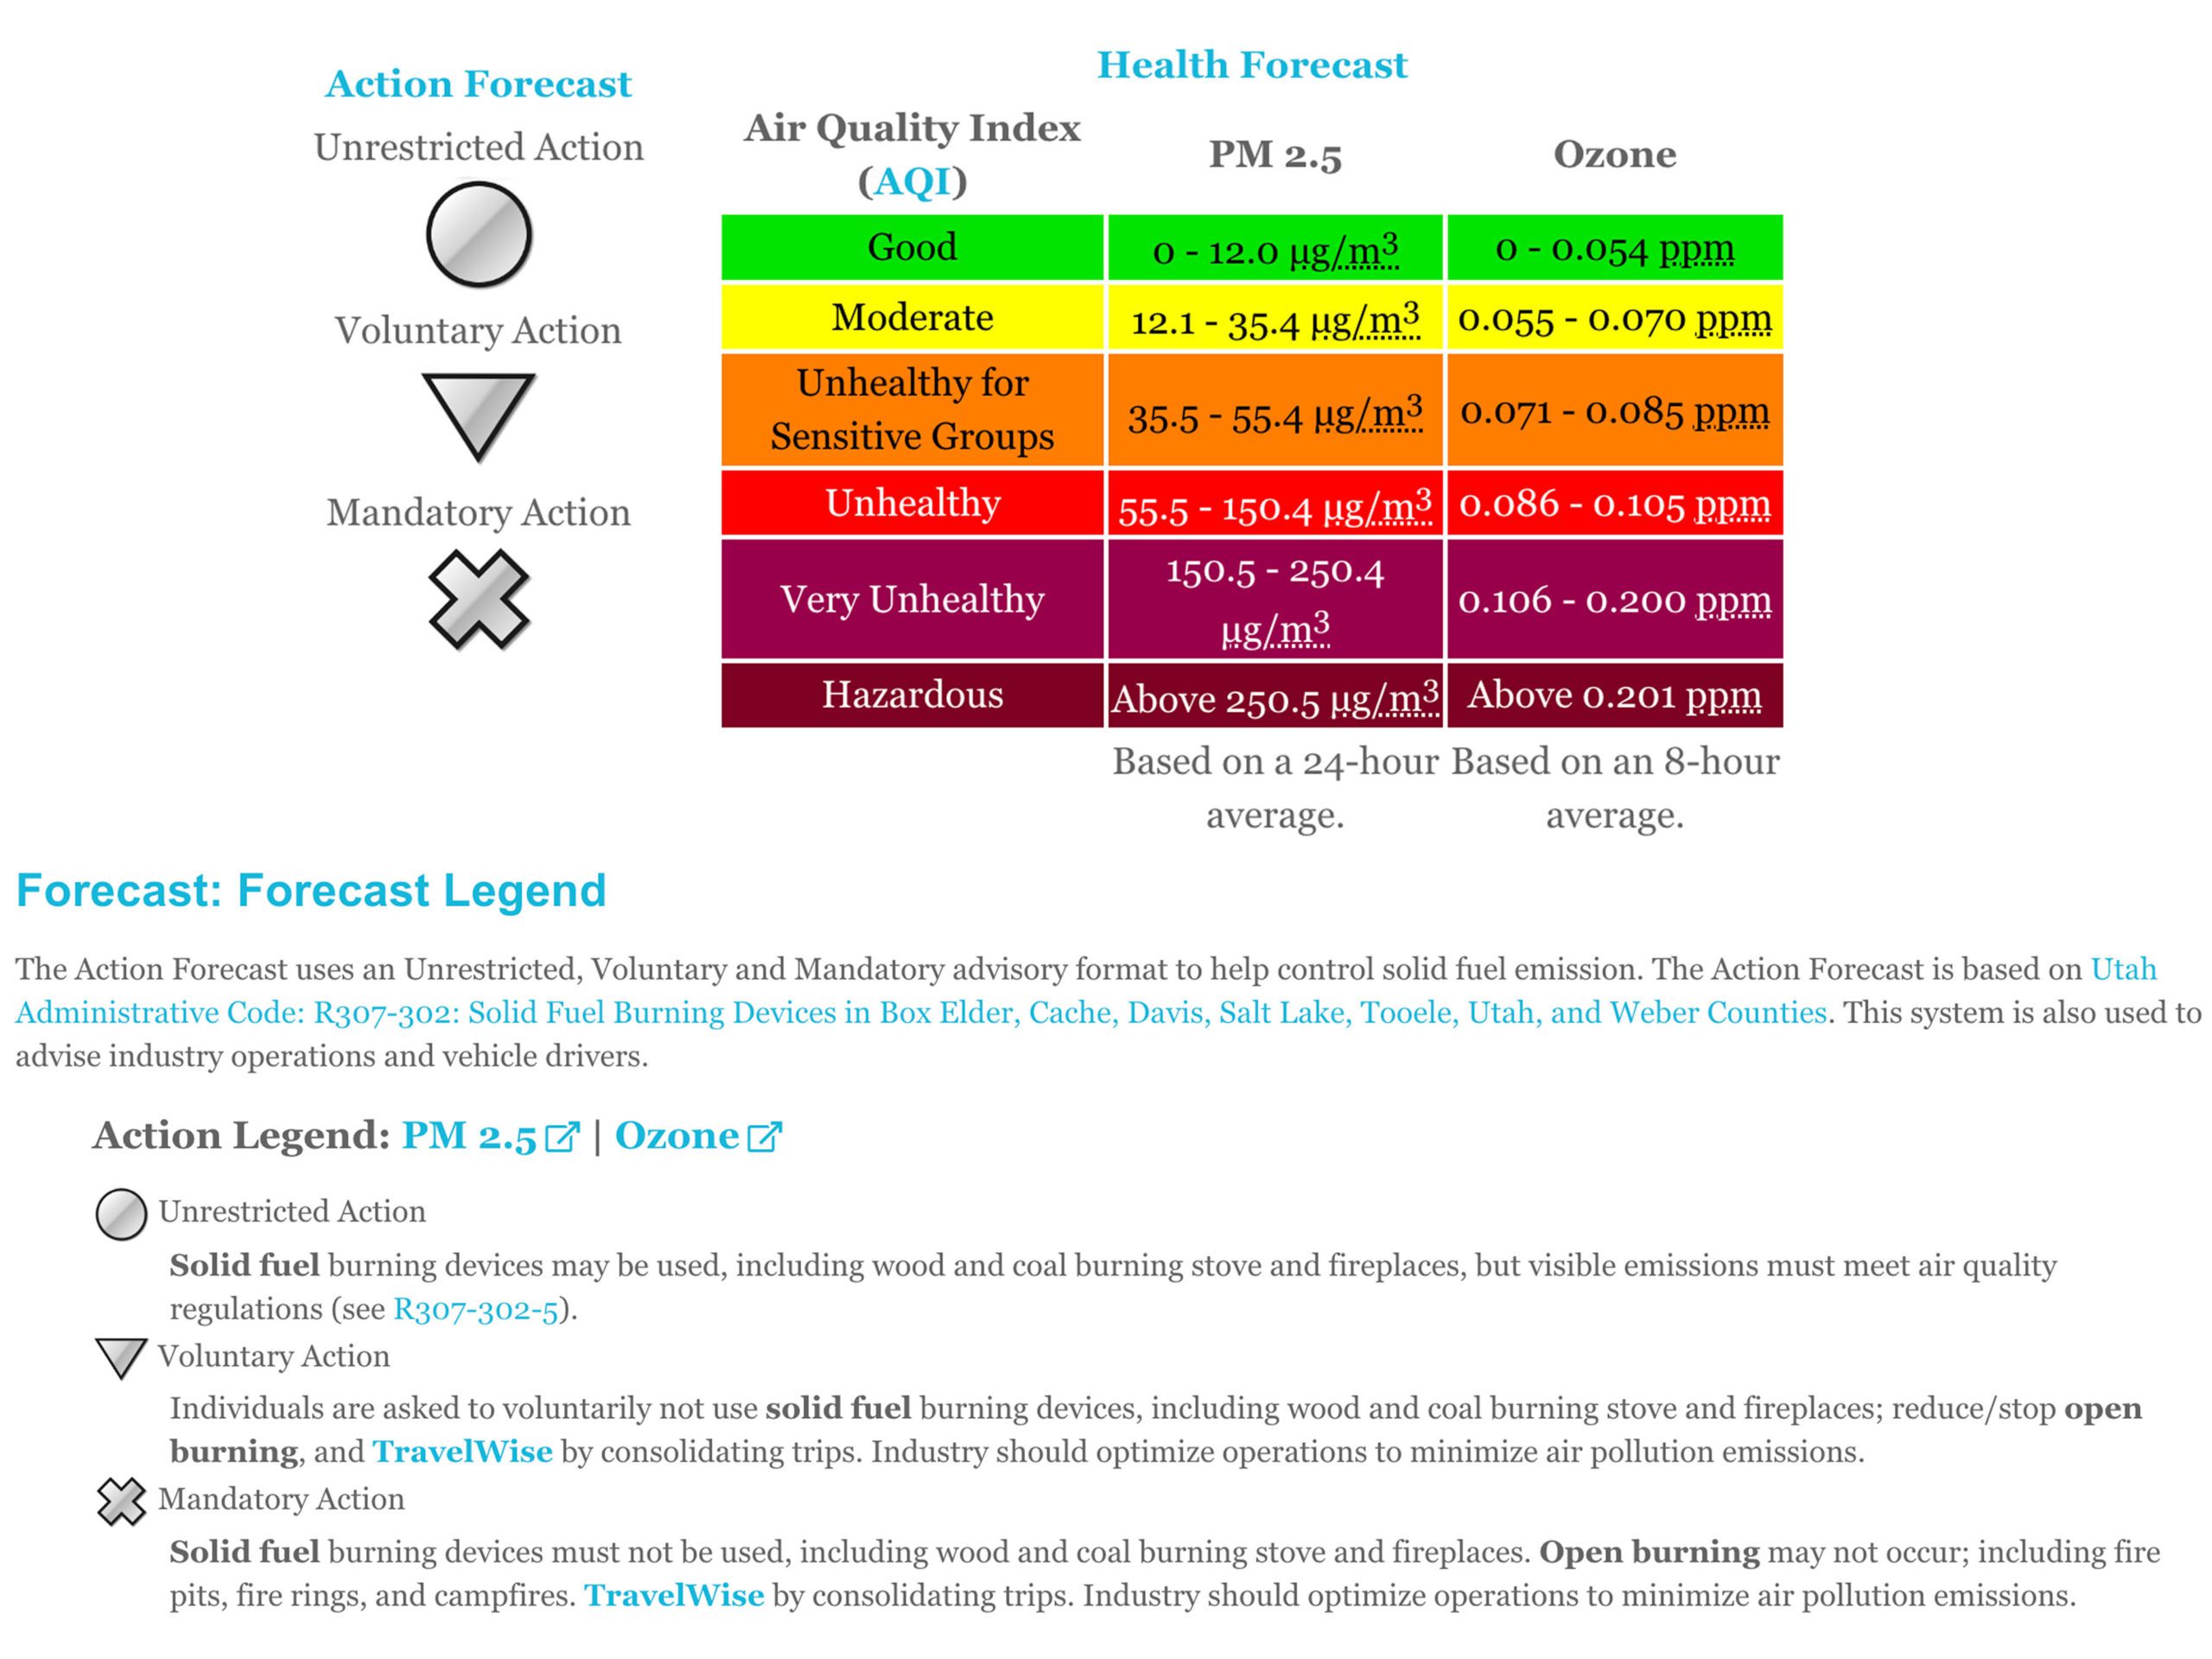 Air Quality and action forecast explanation.